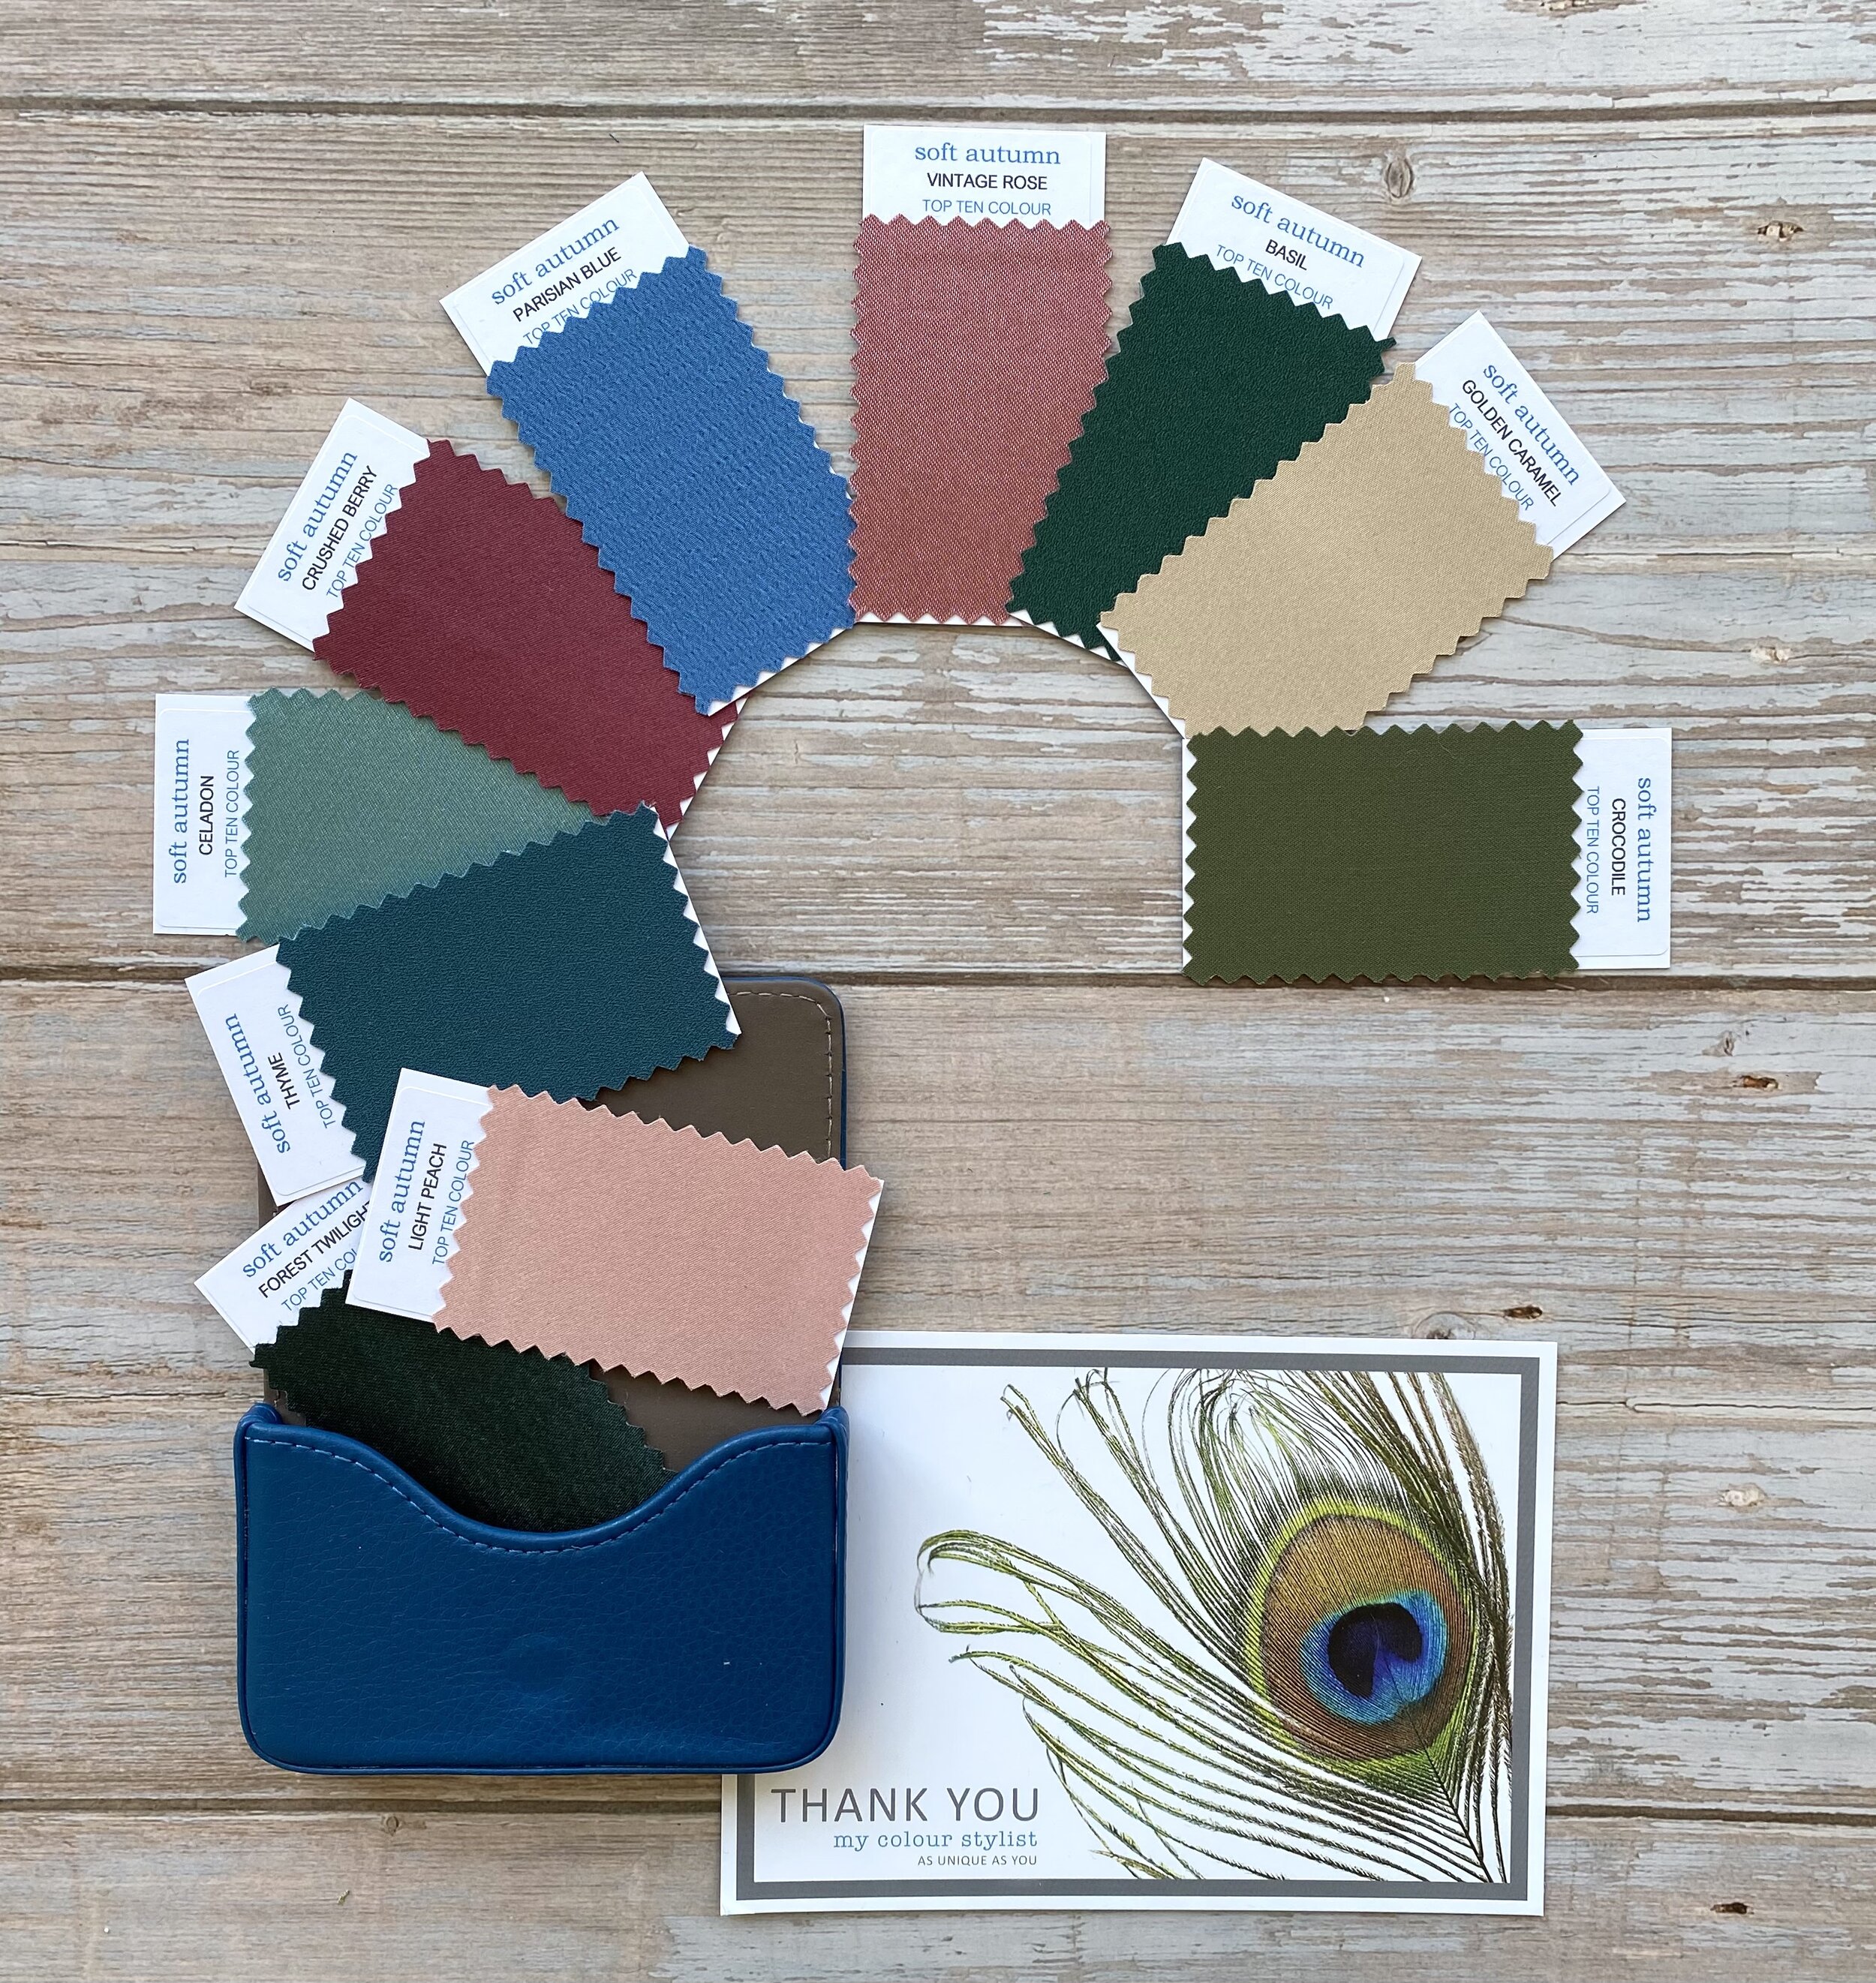 Fabric Swatches — My Colour Stylist